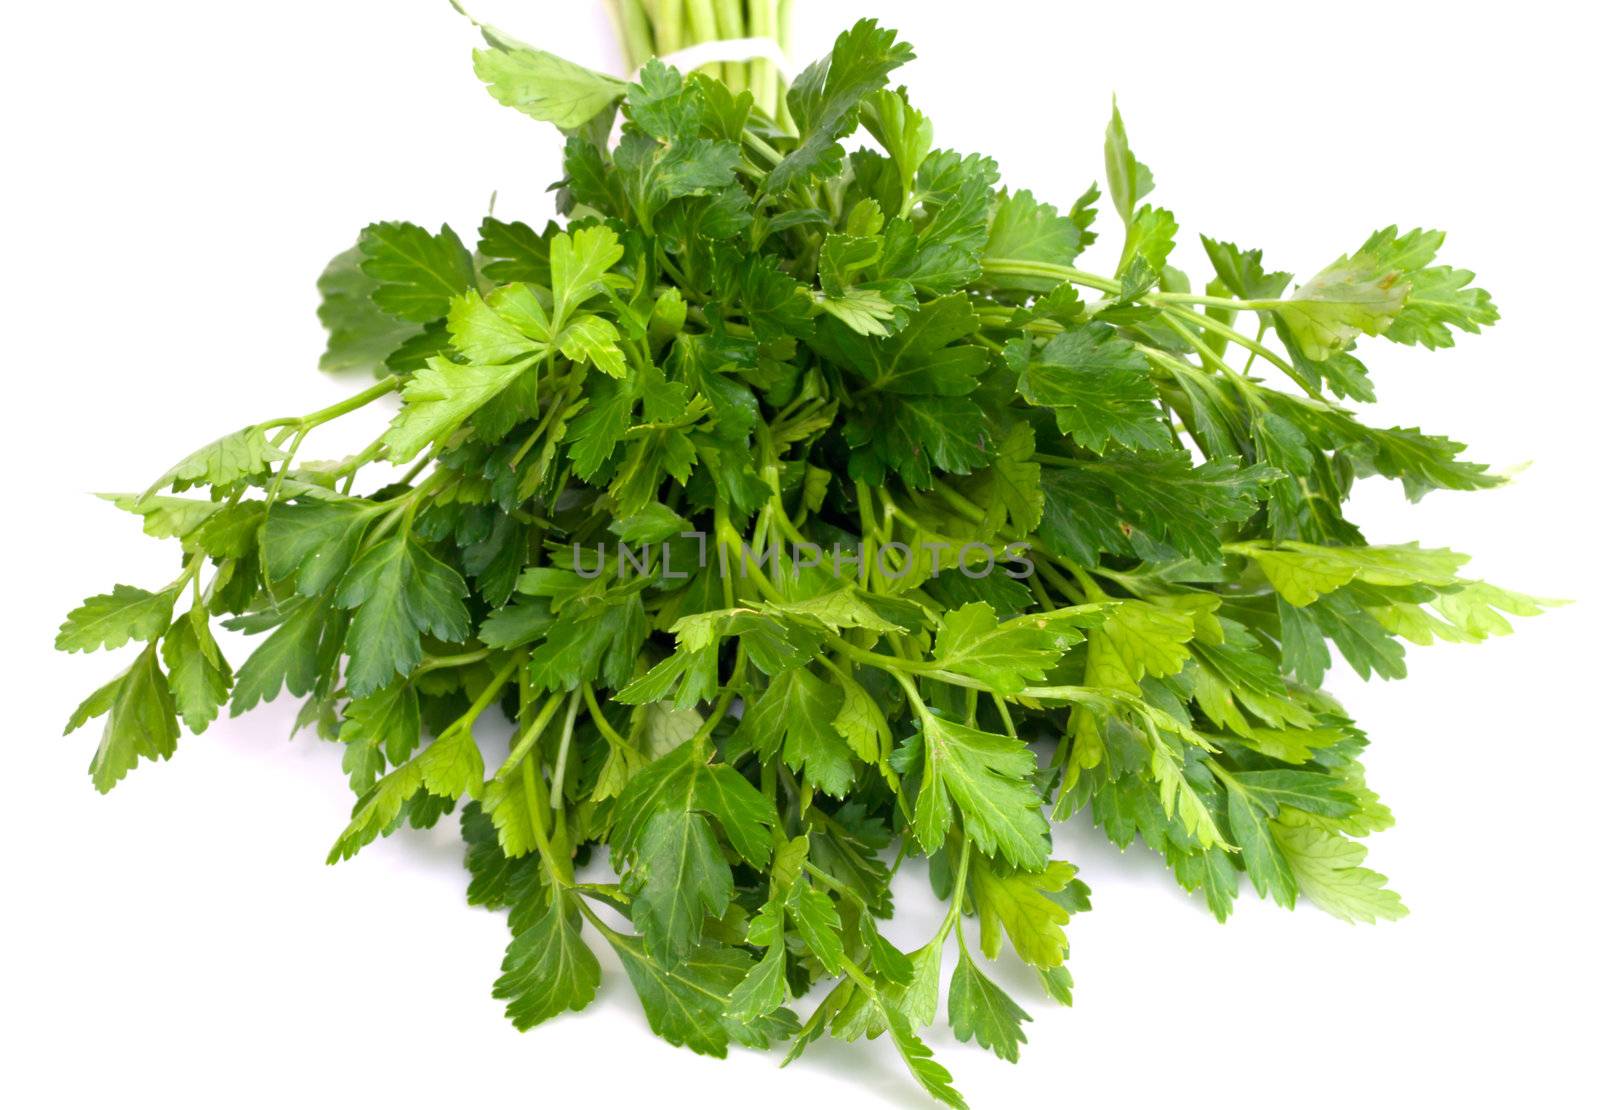 Bunch of Fresh green parsley isolated on white background 